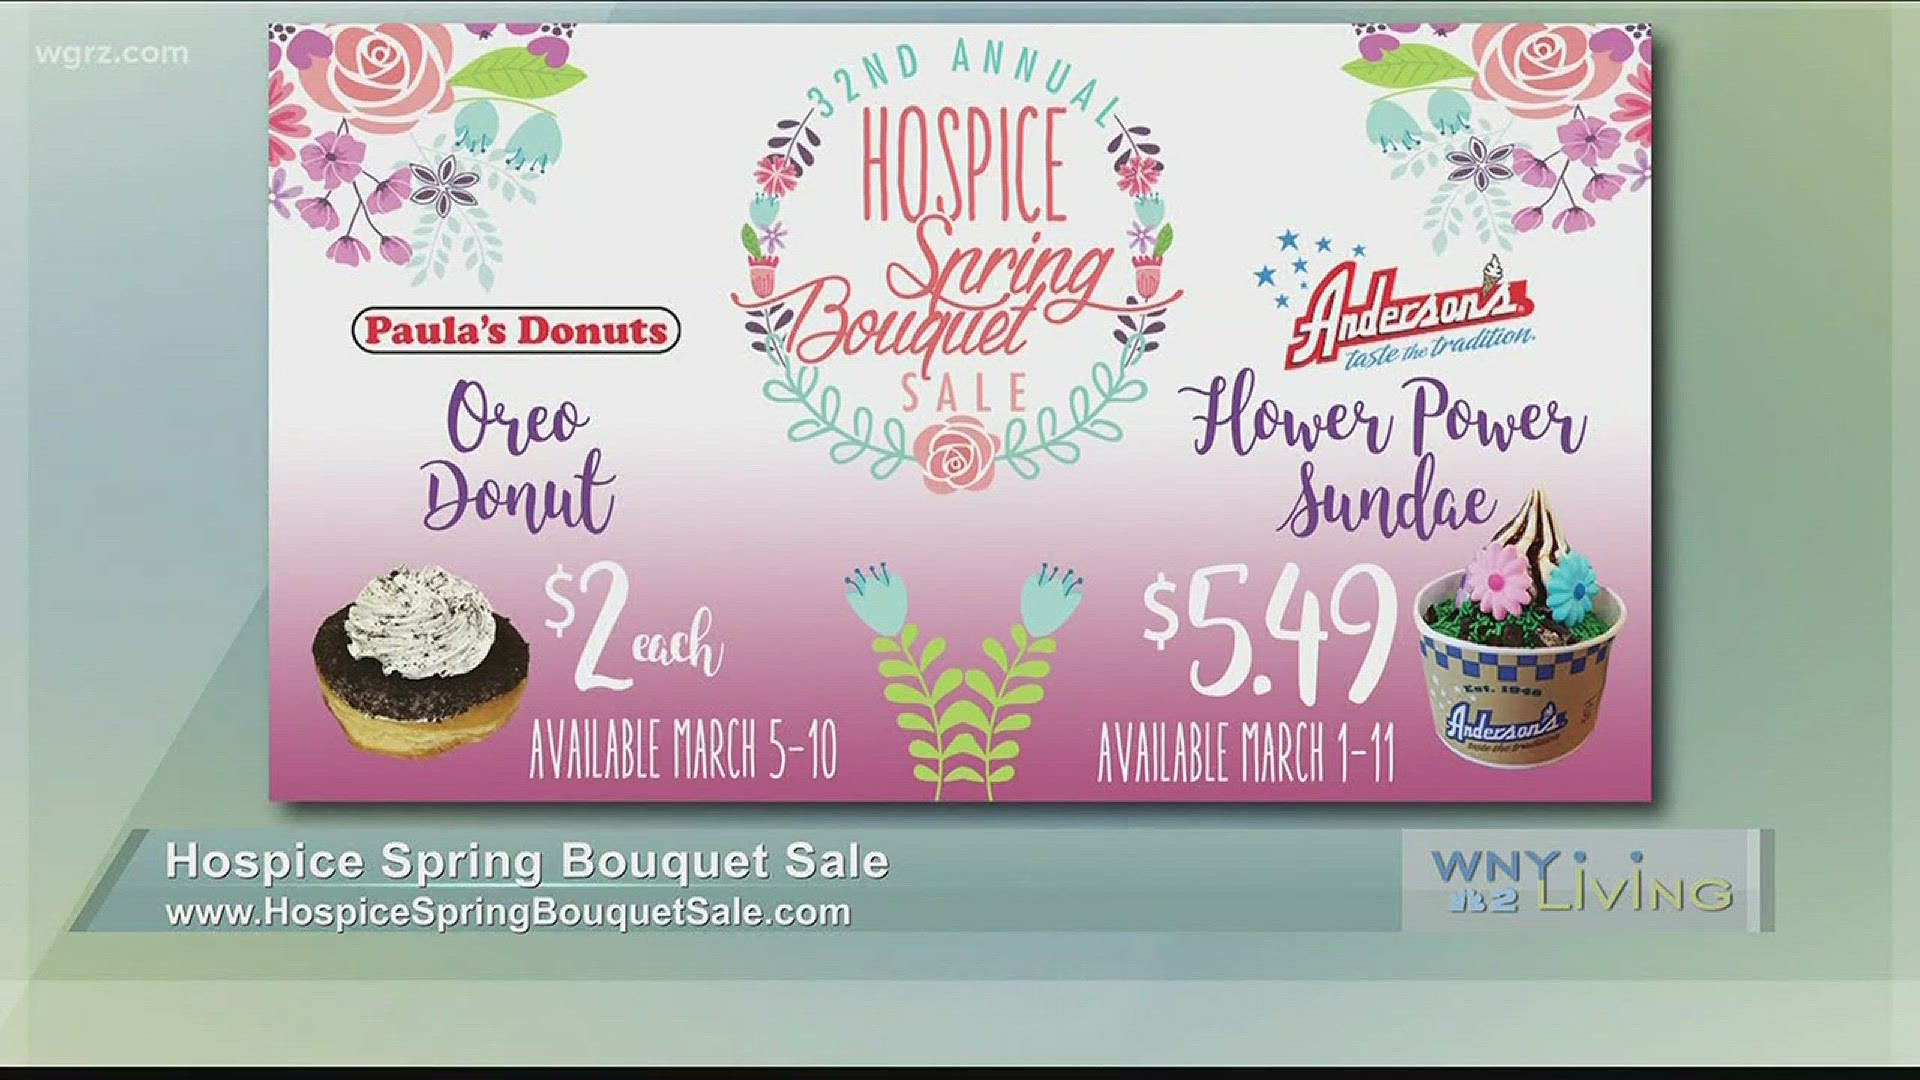 WNY Living - March 3rd - Hospice Spring Bouquet Sale